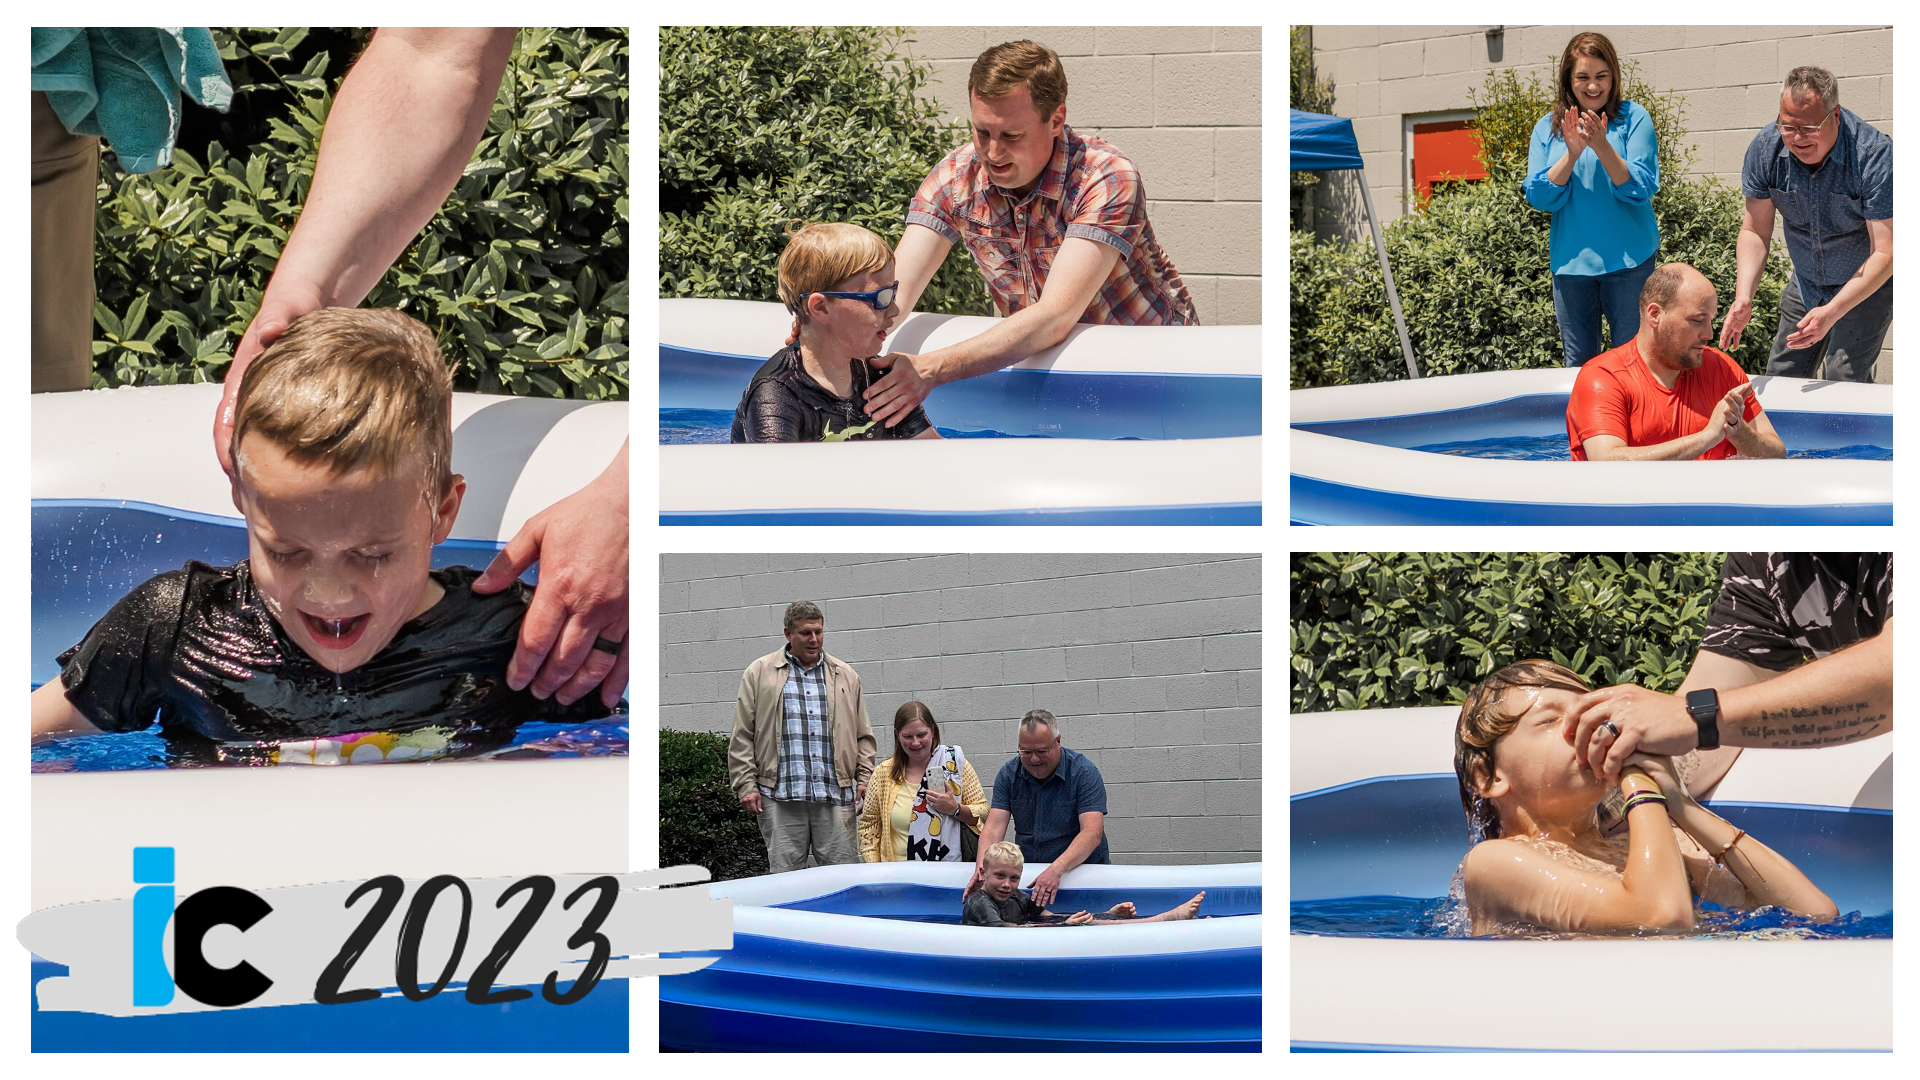    We celebrated new life in Jesus with Baptisms this Spring and Fall. We launched a new I-Kids Baptism Class to help our kids understand what it means to be baptized and give them the opportunity to ask questions and discuss their decision to follow